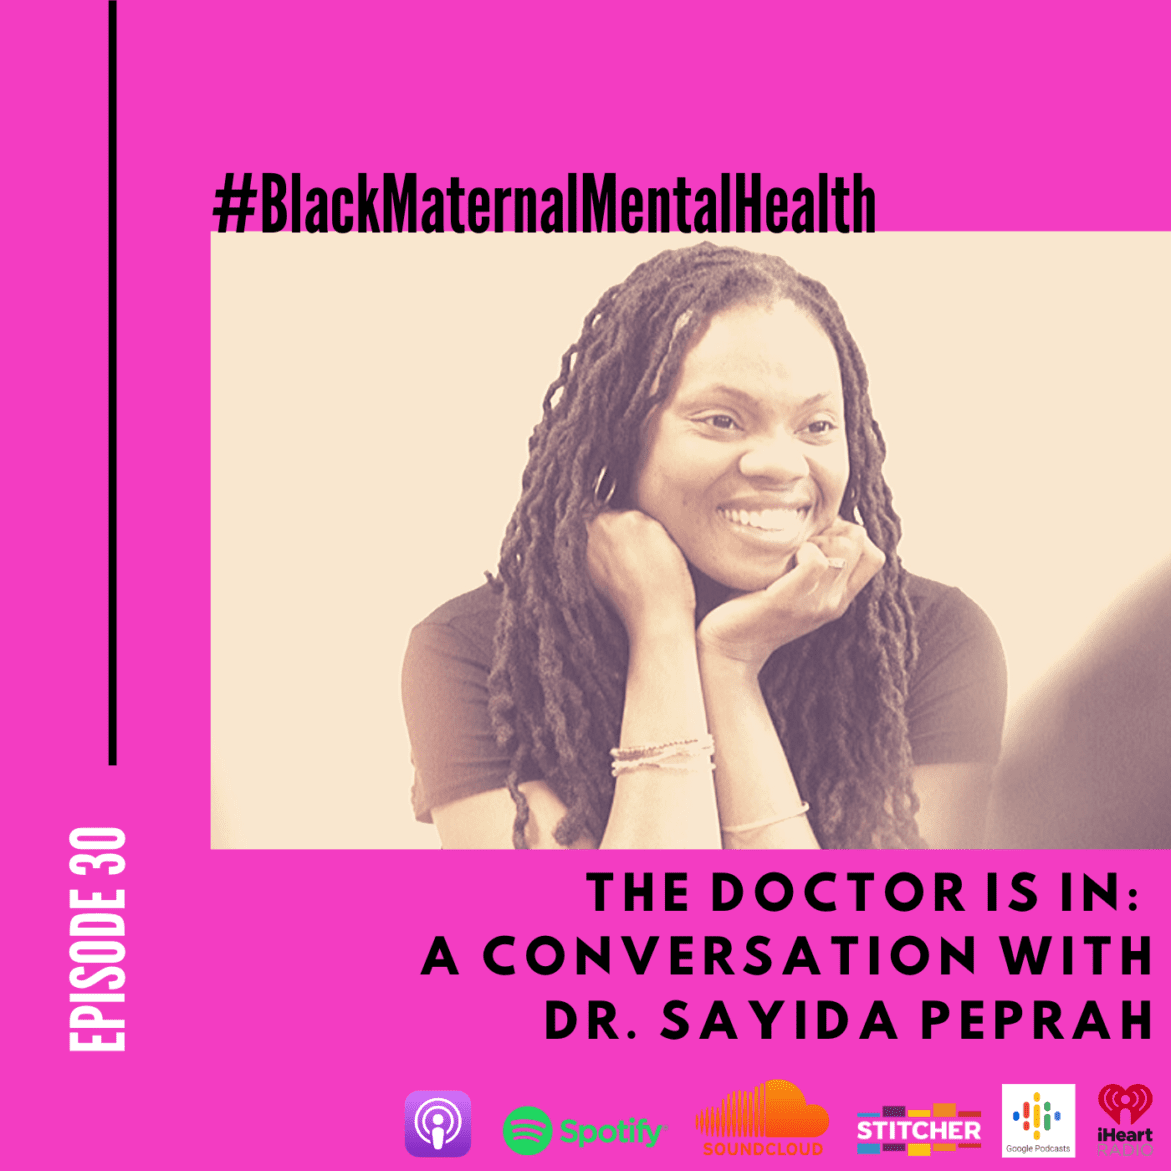 Black Podcasting - DBM Episode 30 The Doctor Is In: A Conversation w/ Dr. Sayida Peprah about #BlackMaternalMentalHealth